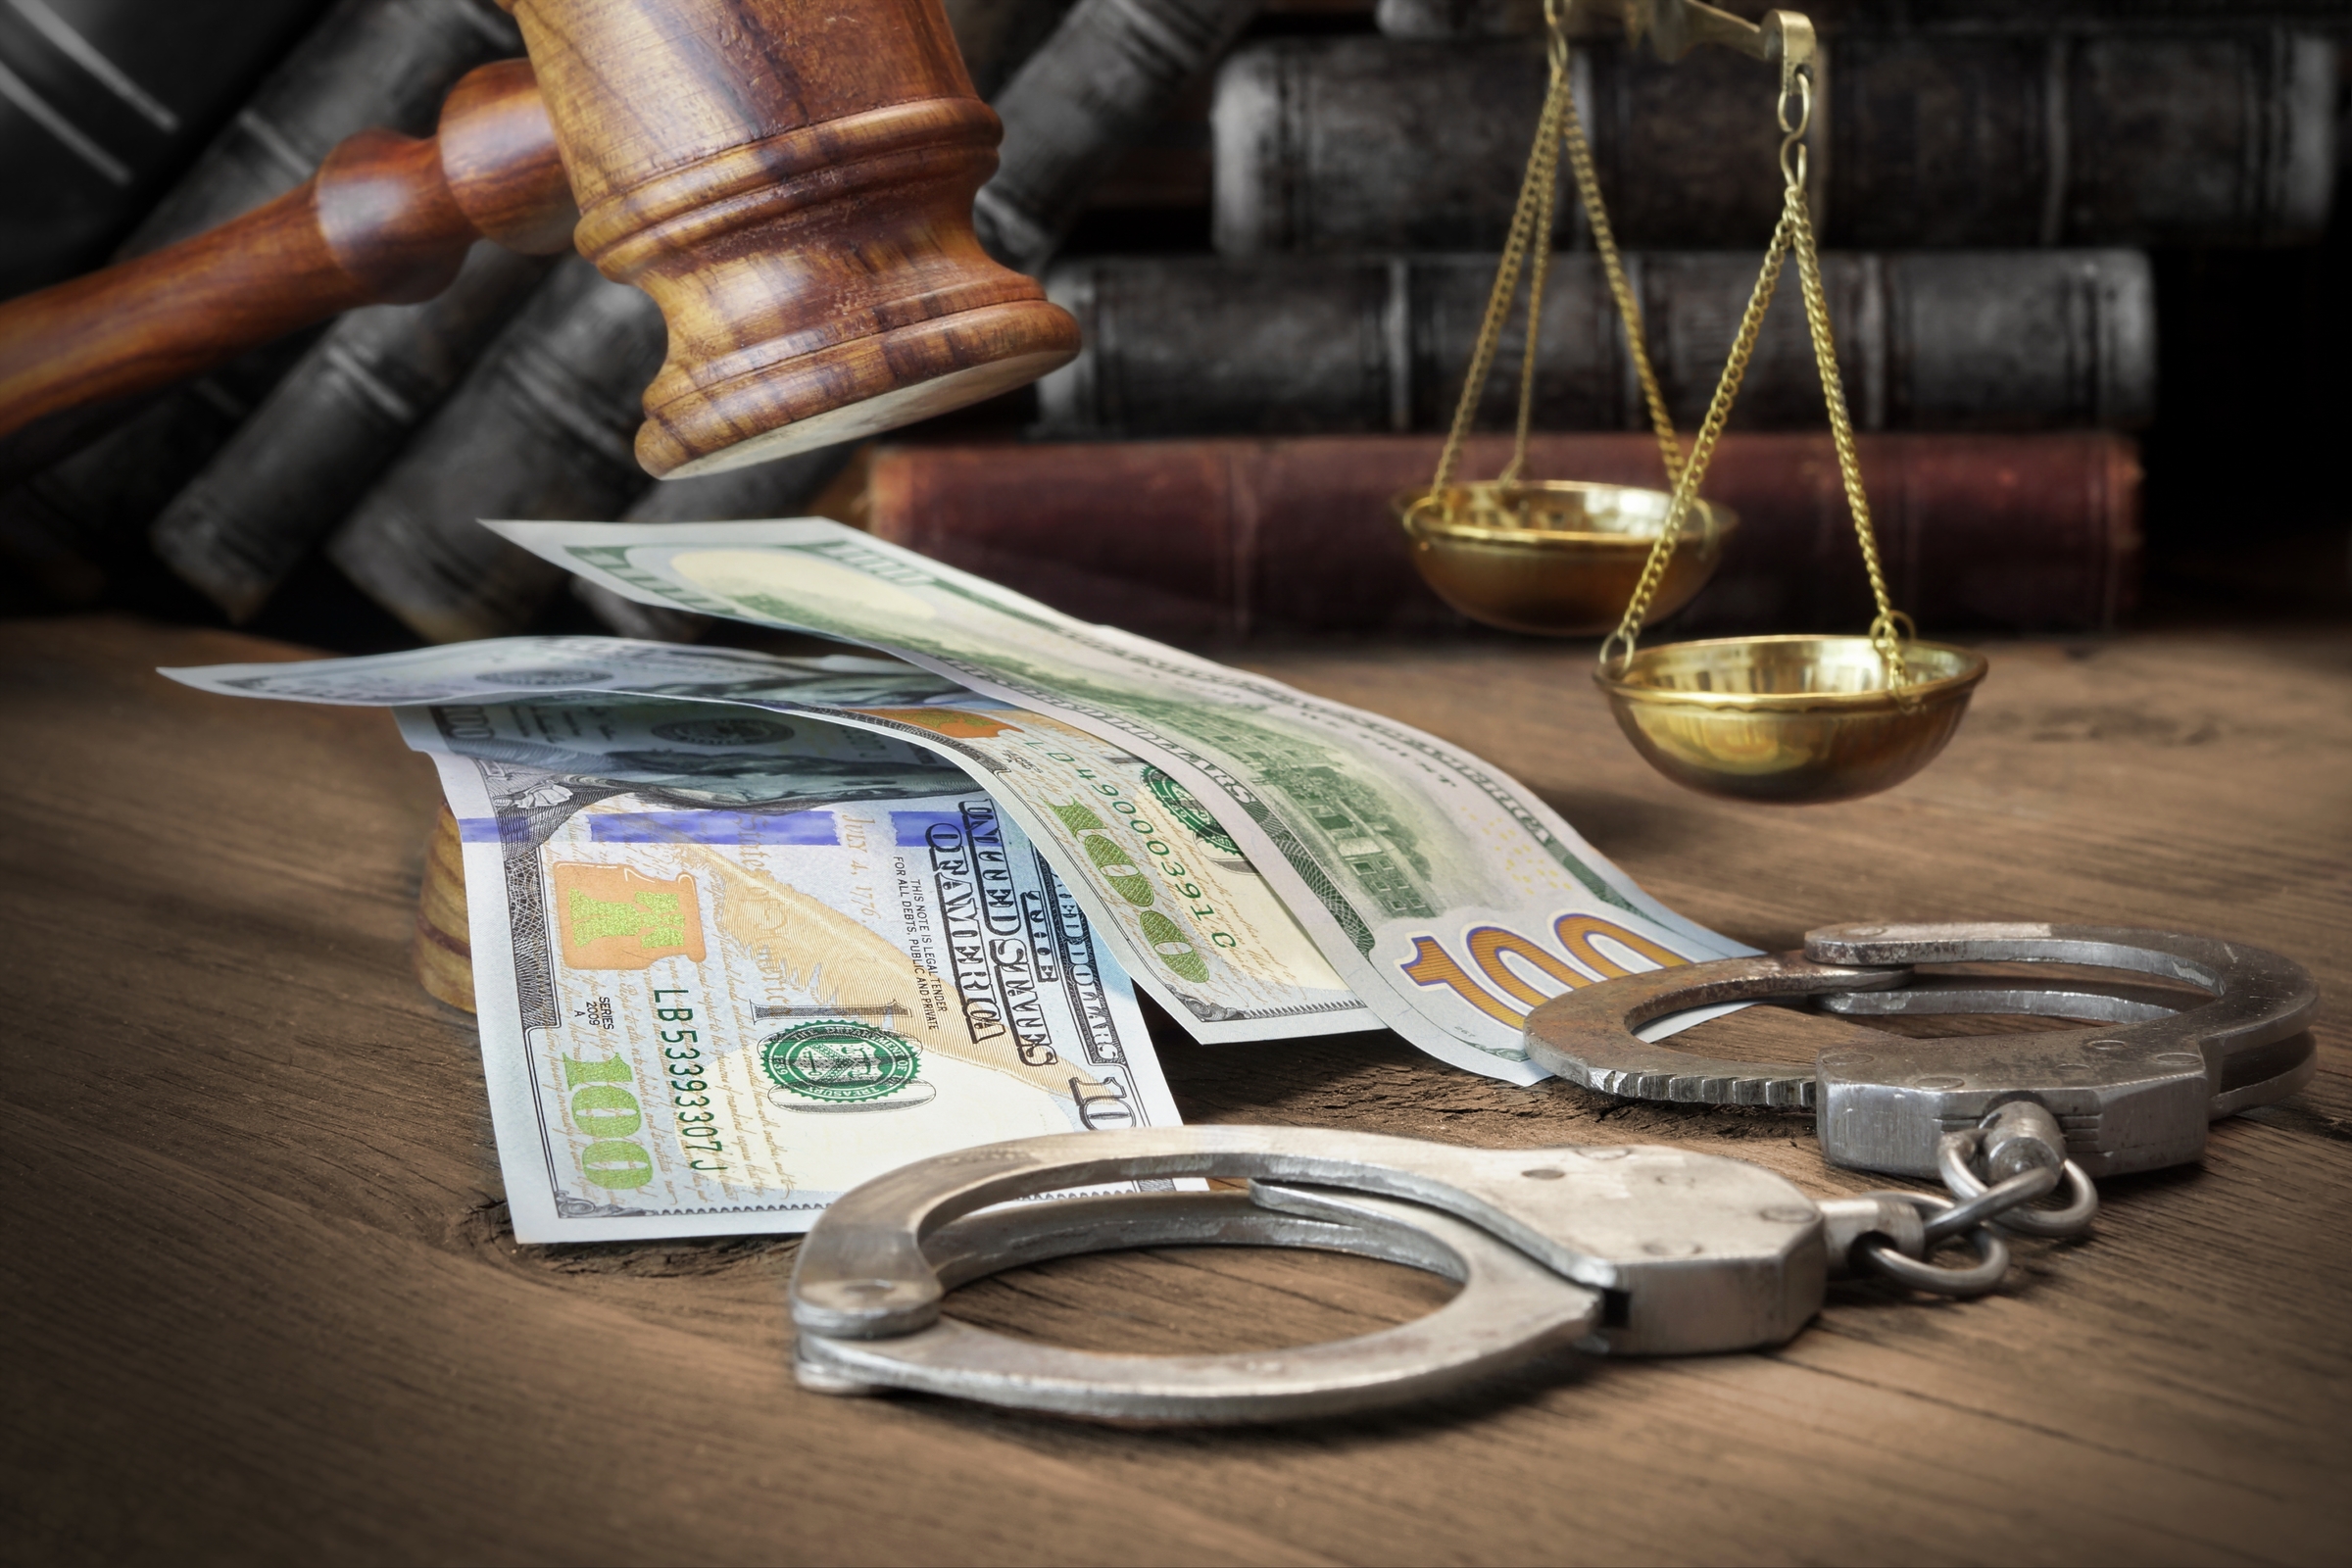 The Bail Bonds System in North Carolina: How Does It Work??